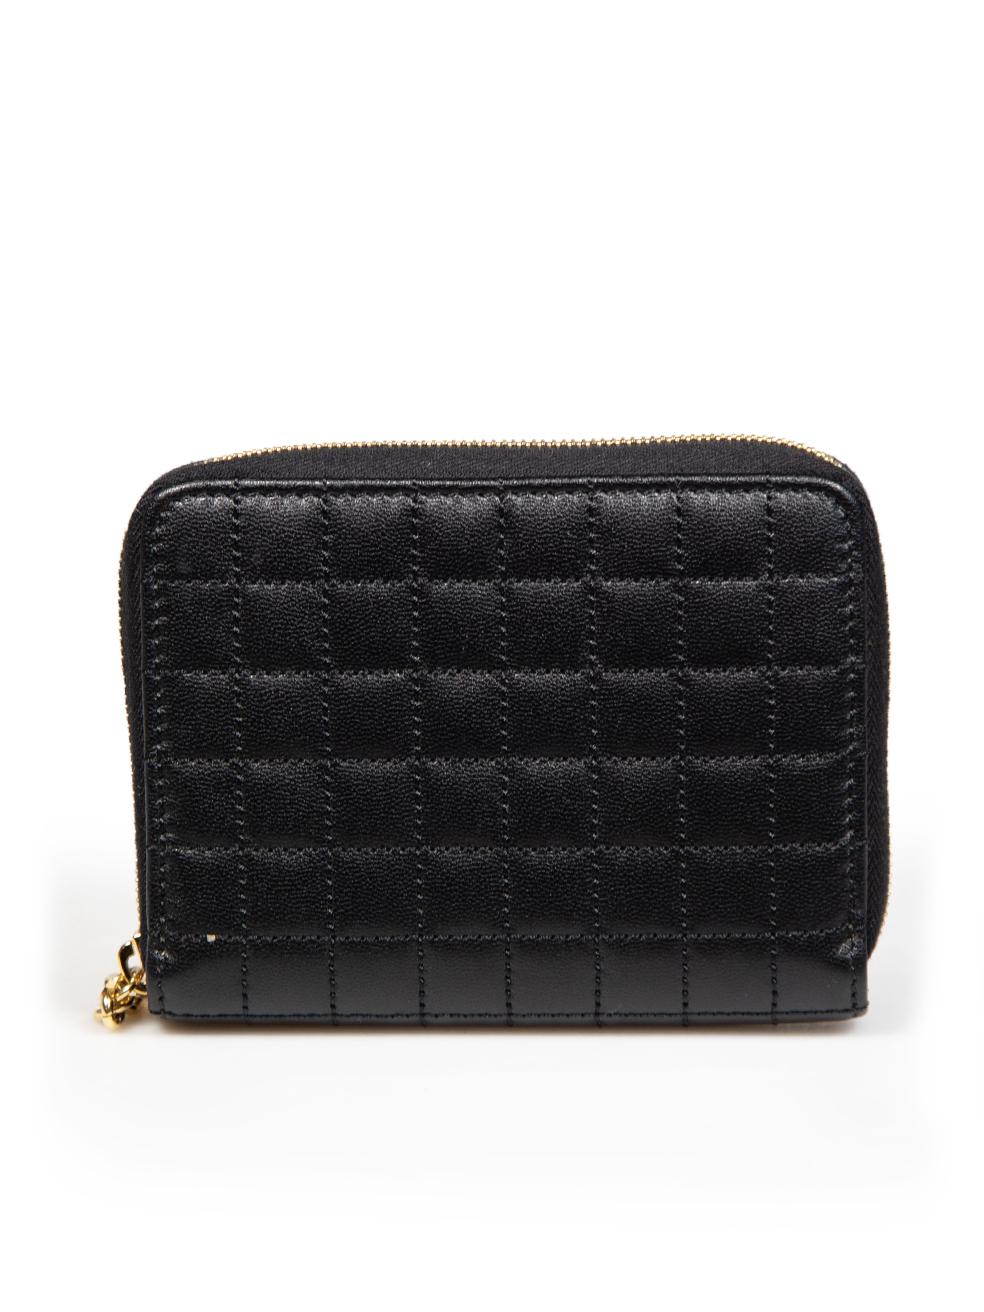 Céline Black Leather C Charm Quilted Wallet In Excellent Condition For Sale In London, GB